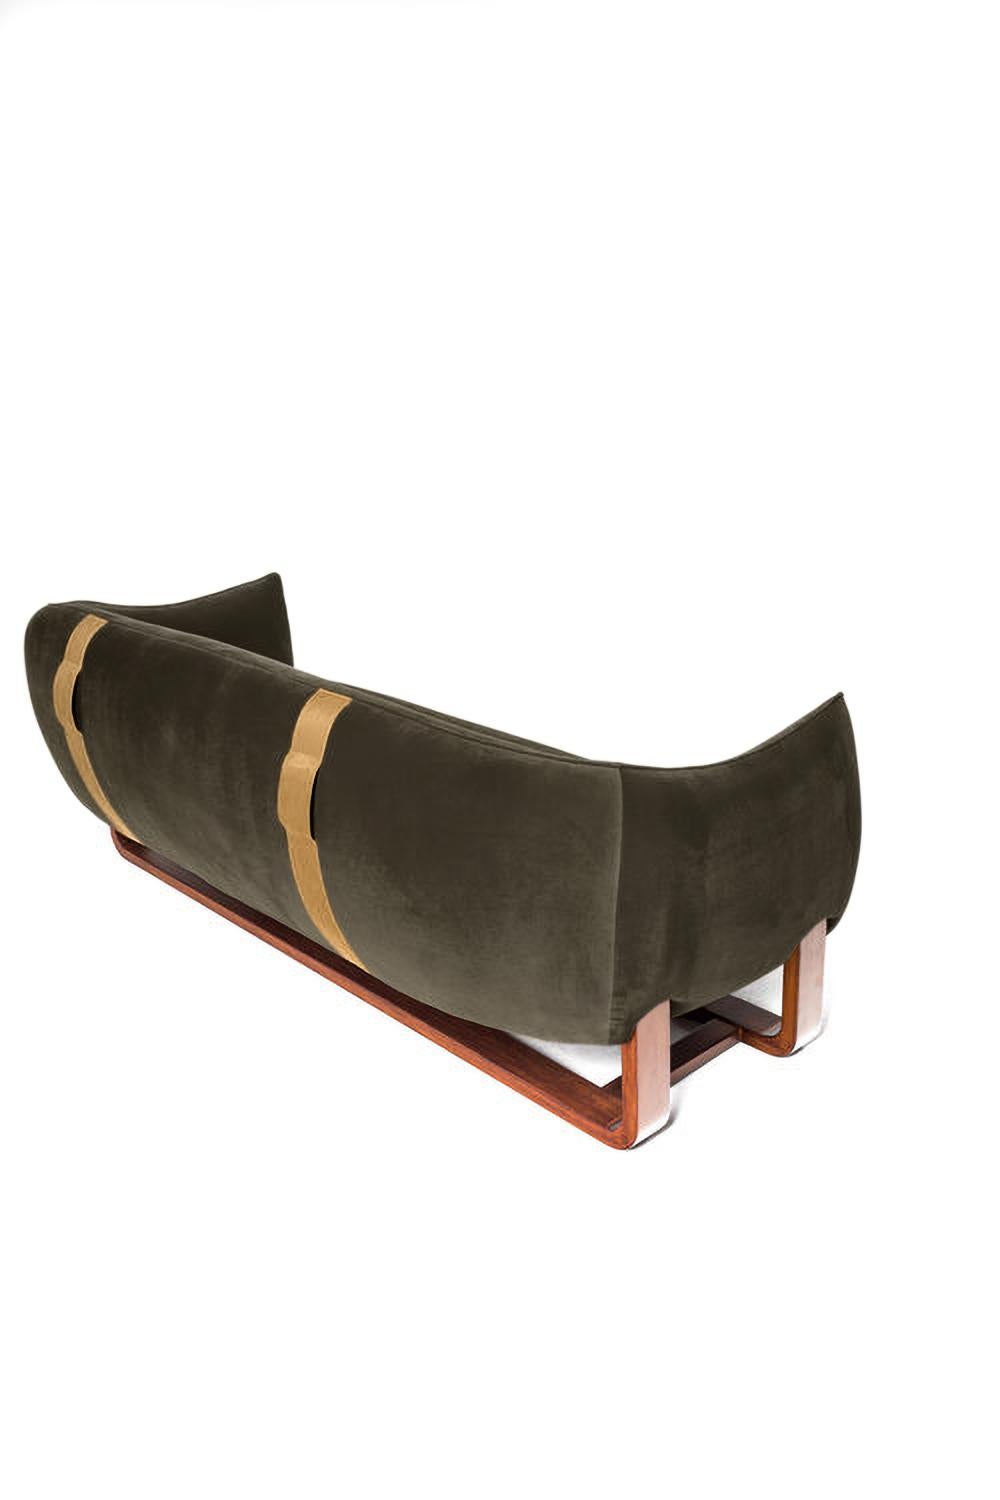 Designer Marie Burgos has expanded on the design concept for her acclaimed Milo lounge chair and created the newly introduced Milo sofa. She uses a molded wooden frame to support the luxuriously comfortable seating that is covered in any of a wide